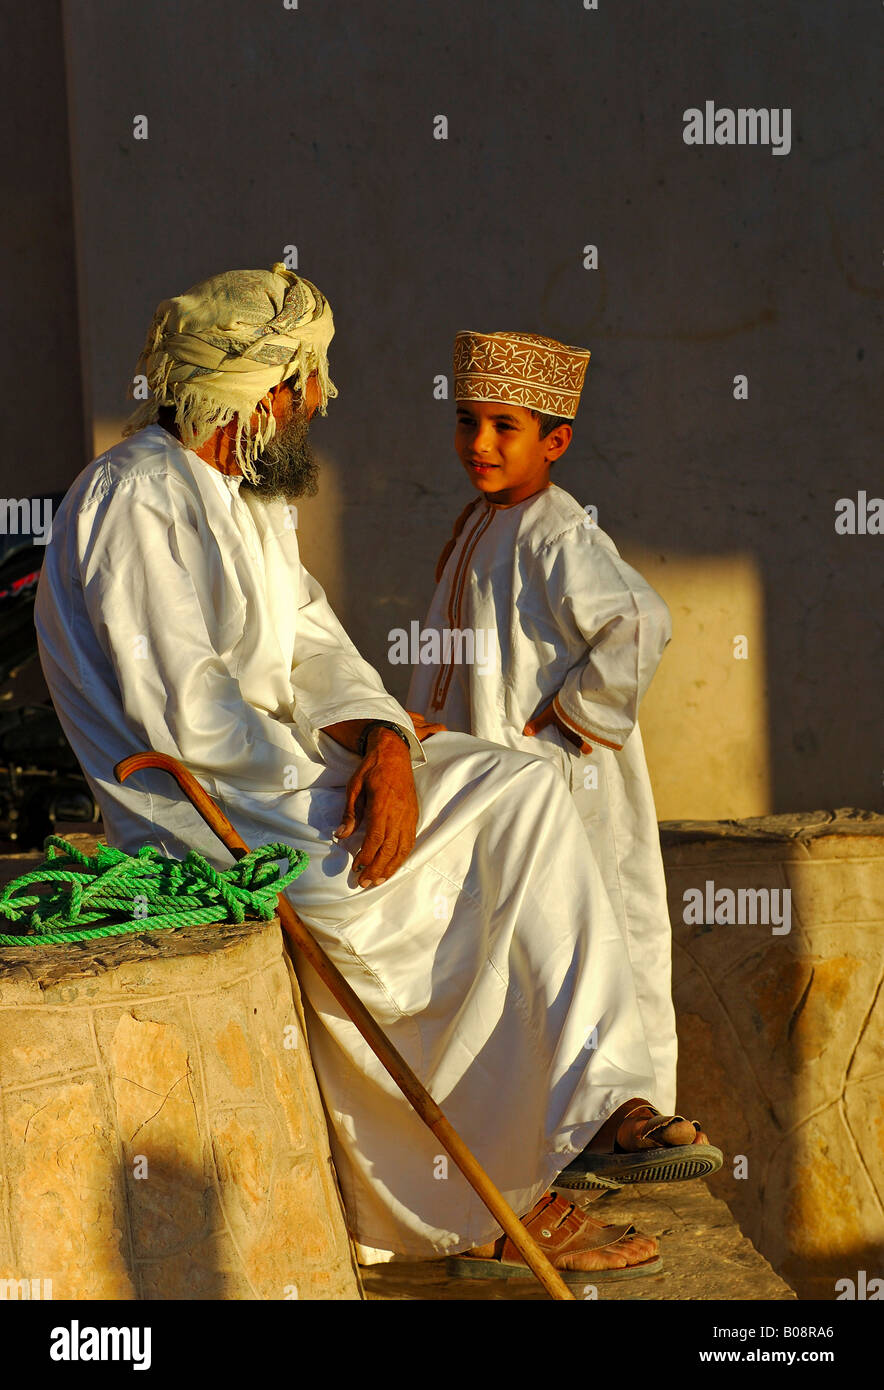 Father and son talking, wearing traditional Omani clothing, Nizwa, Oman, Middle East Stock Photo